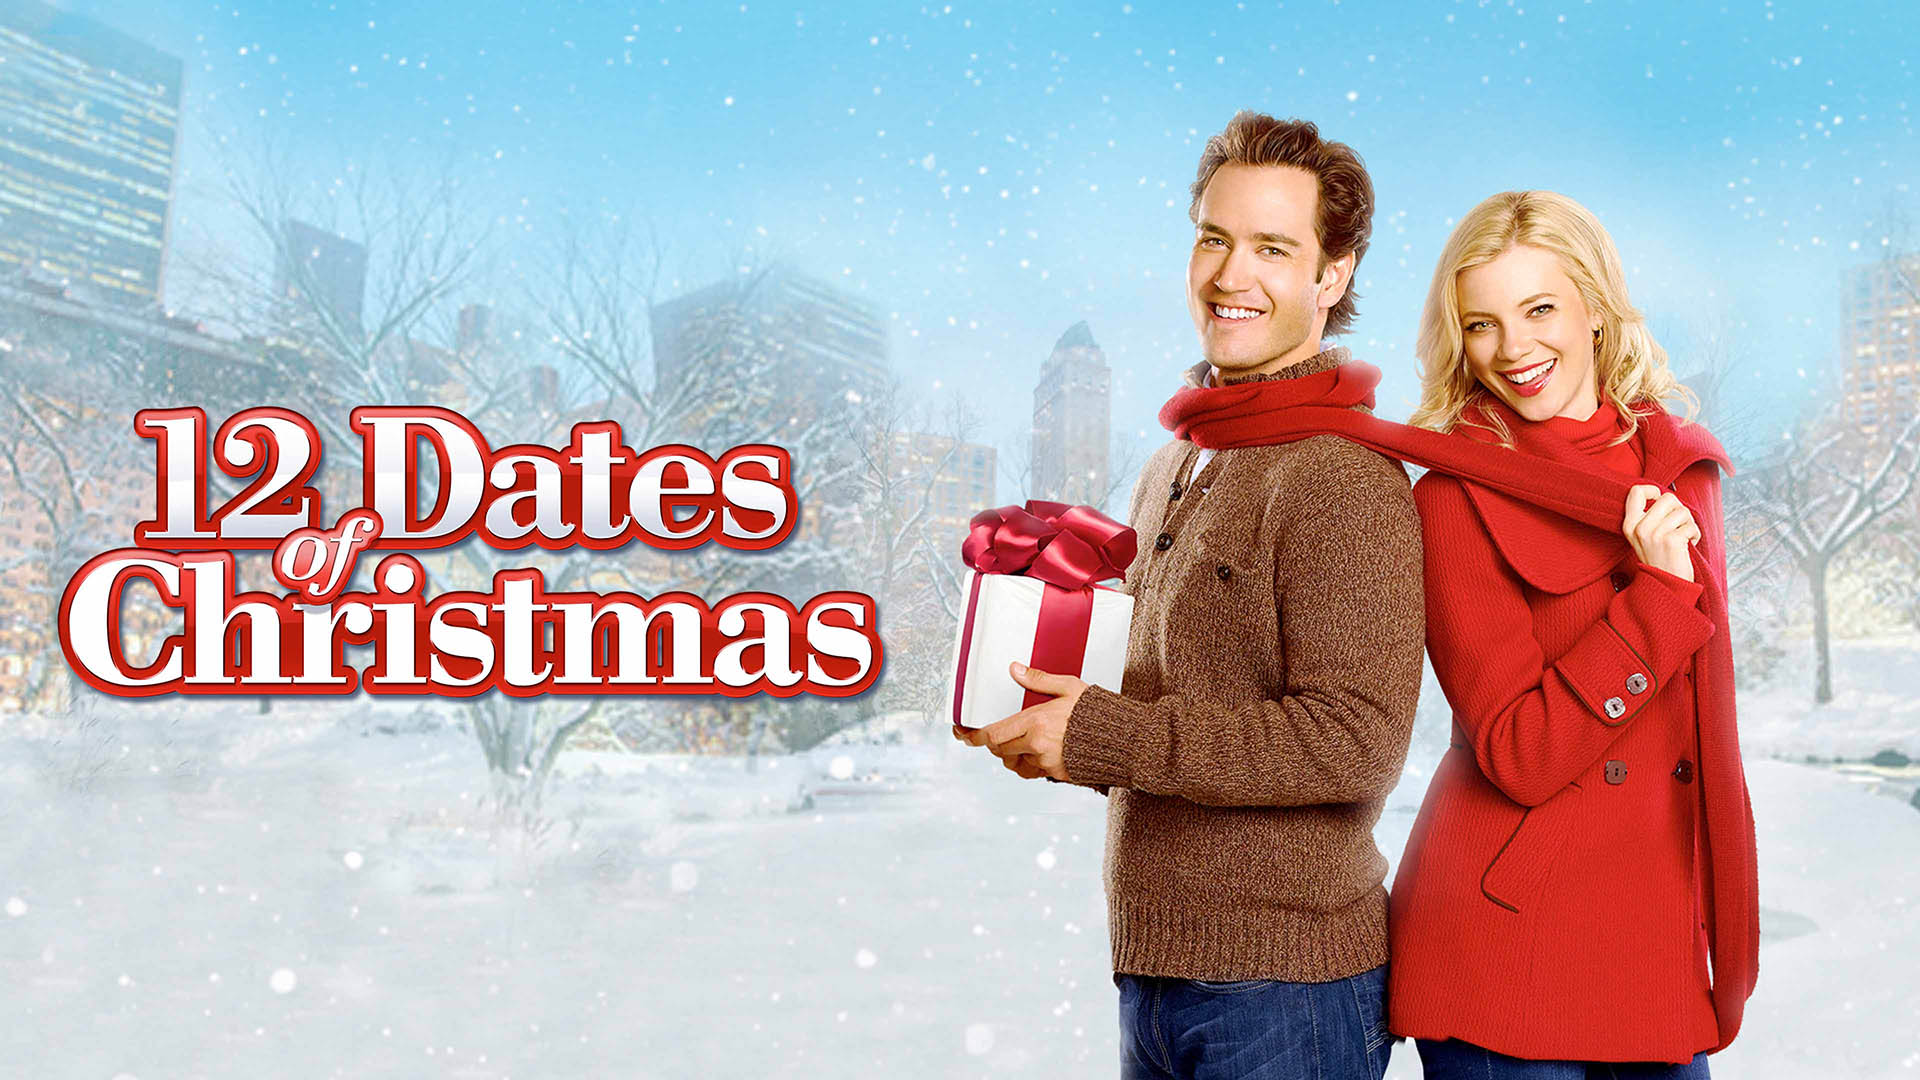 Watch 12 Dates of Christmas Online | Stream Full Movies